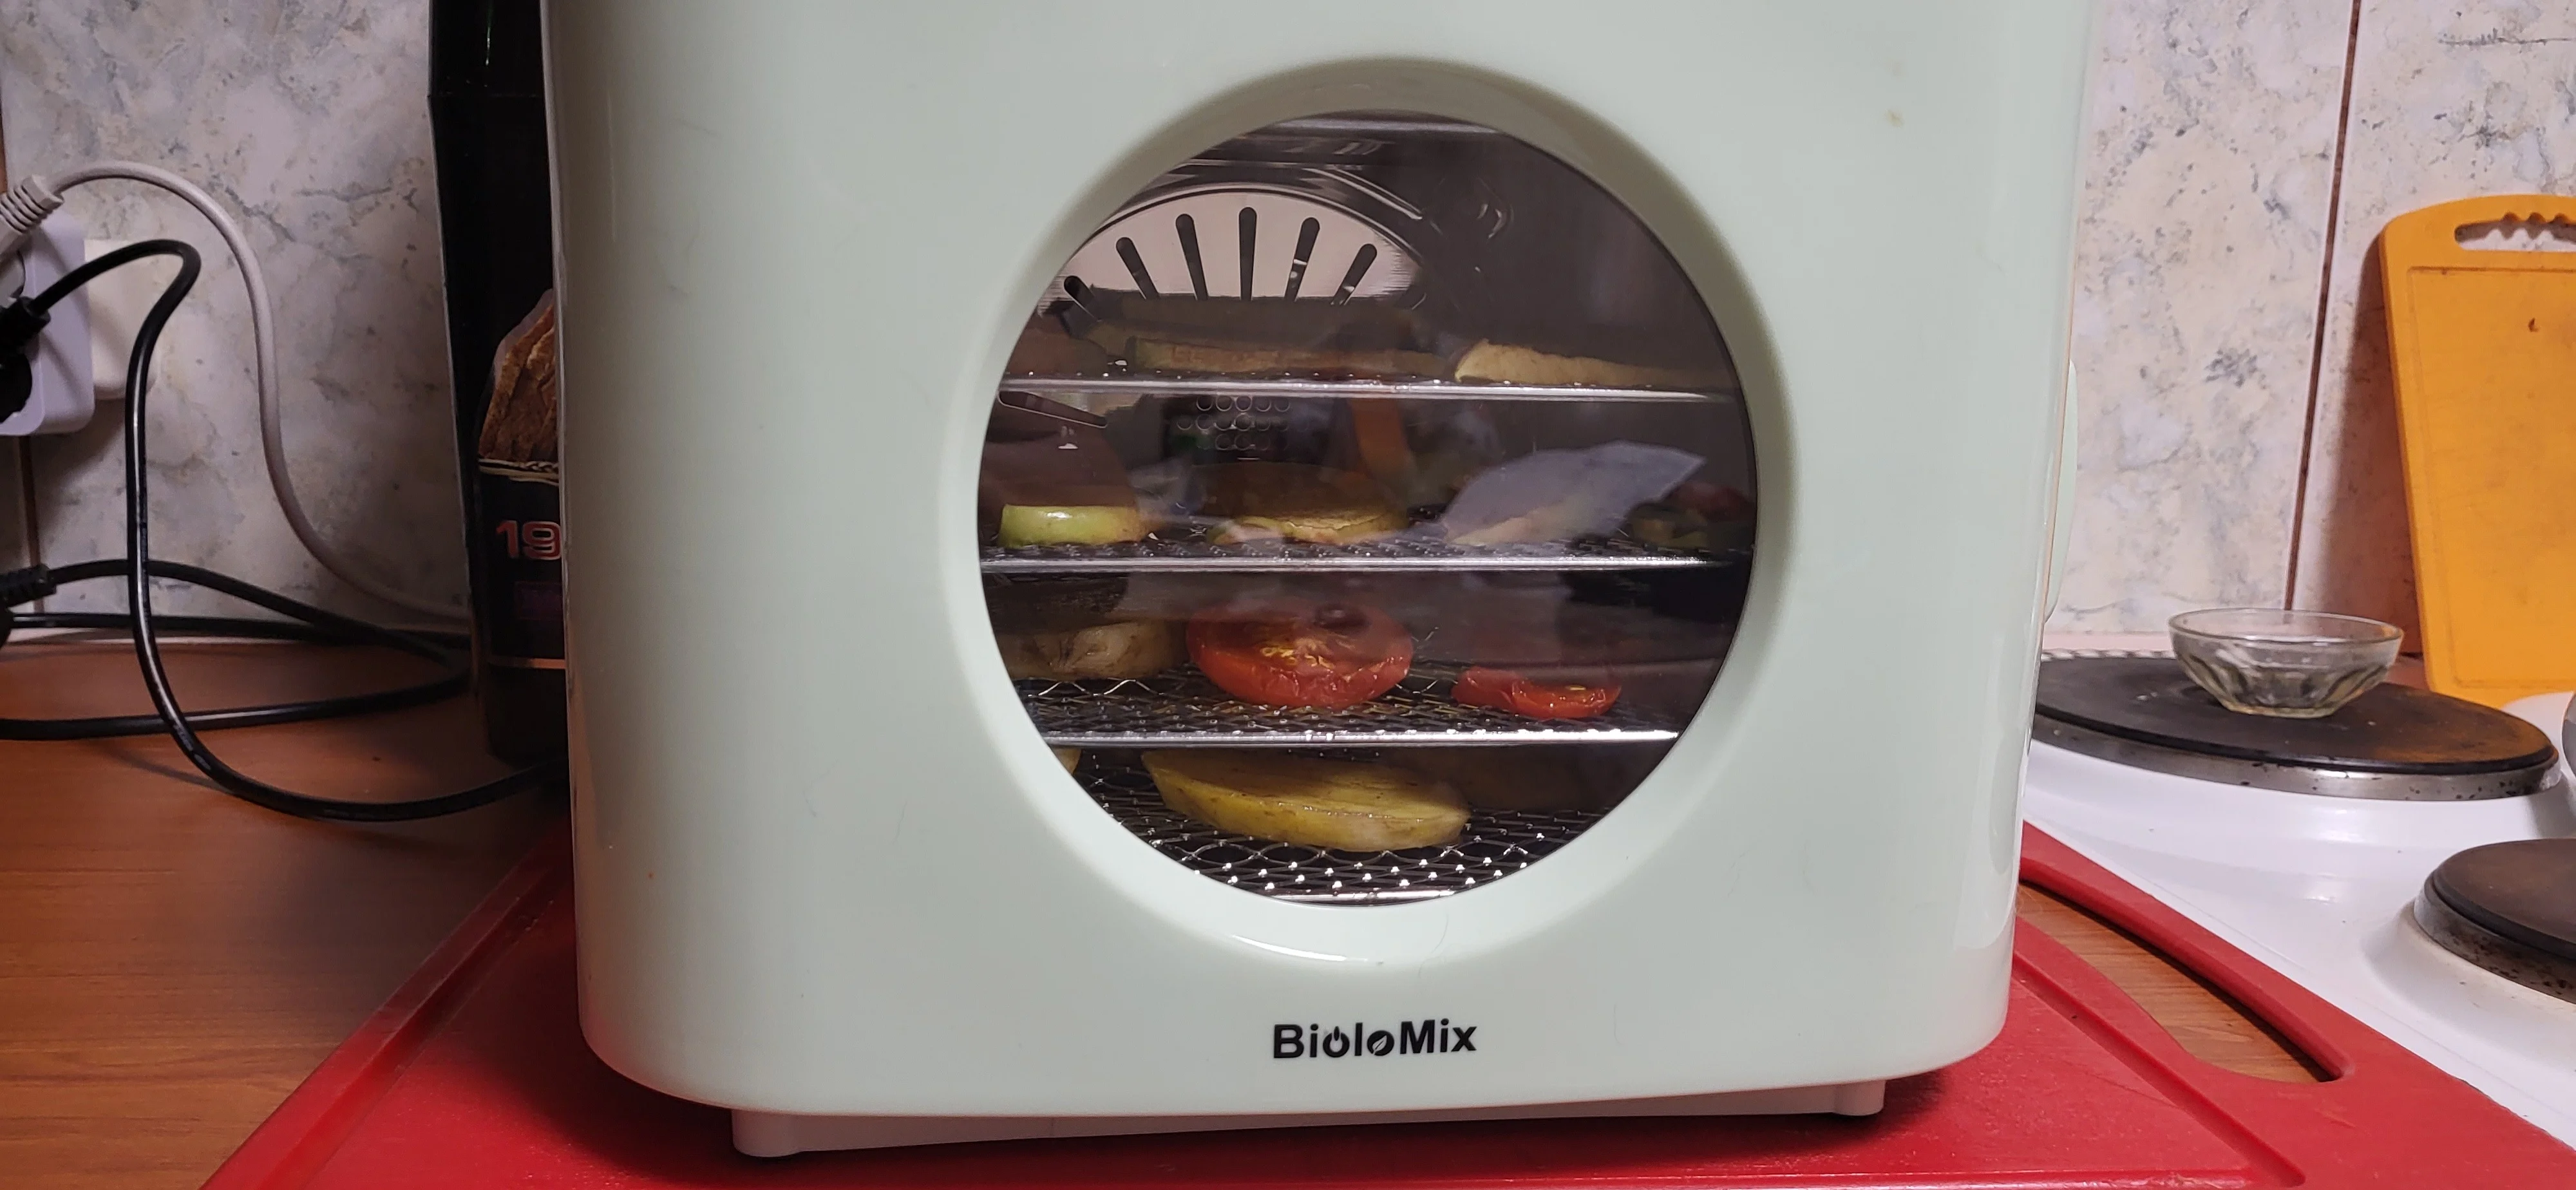 Digital Food Dehydrator with LED Display photo review